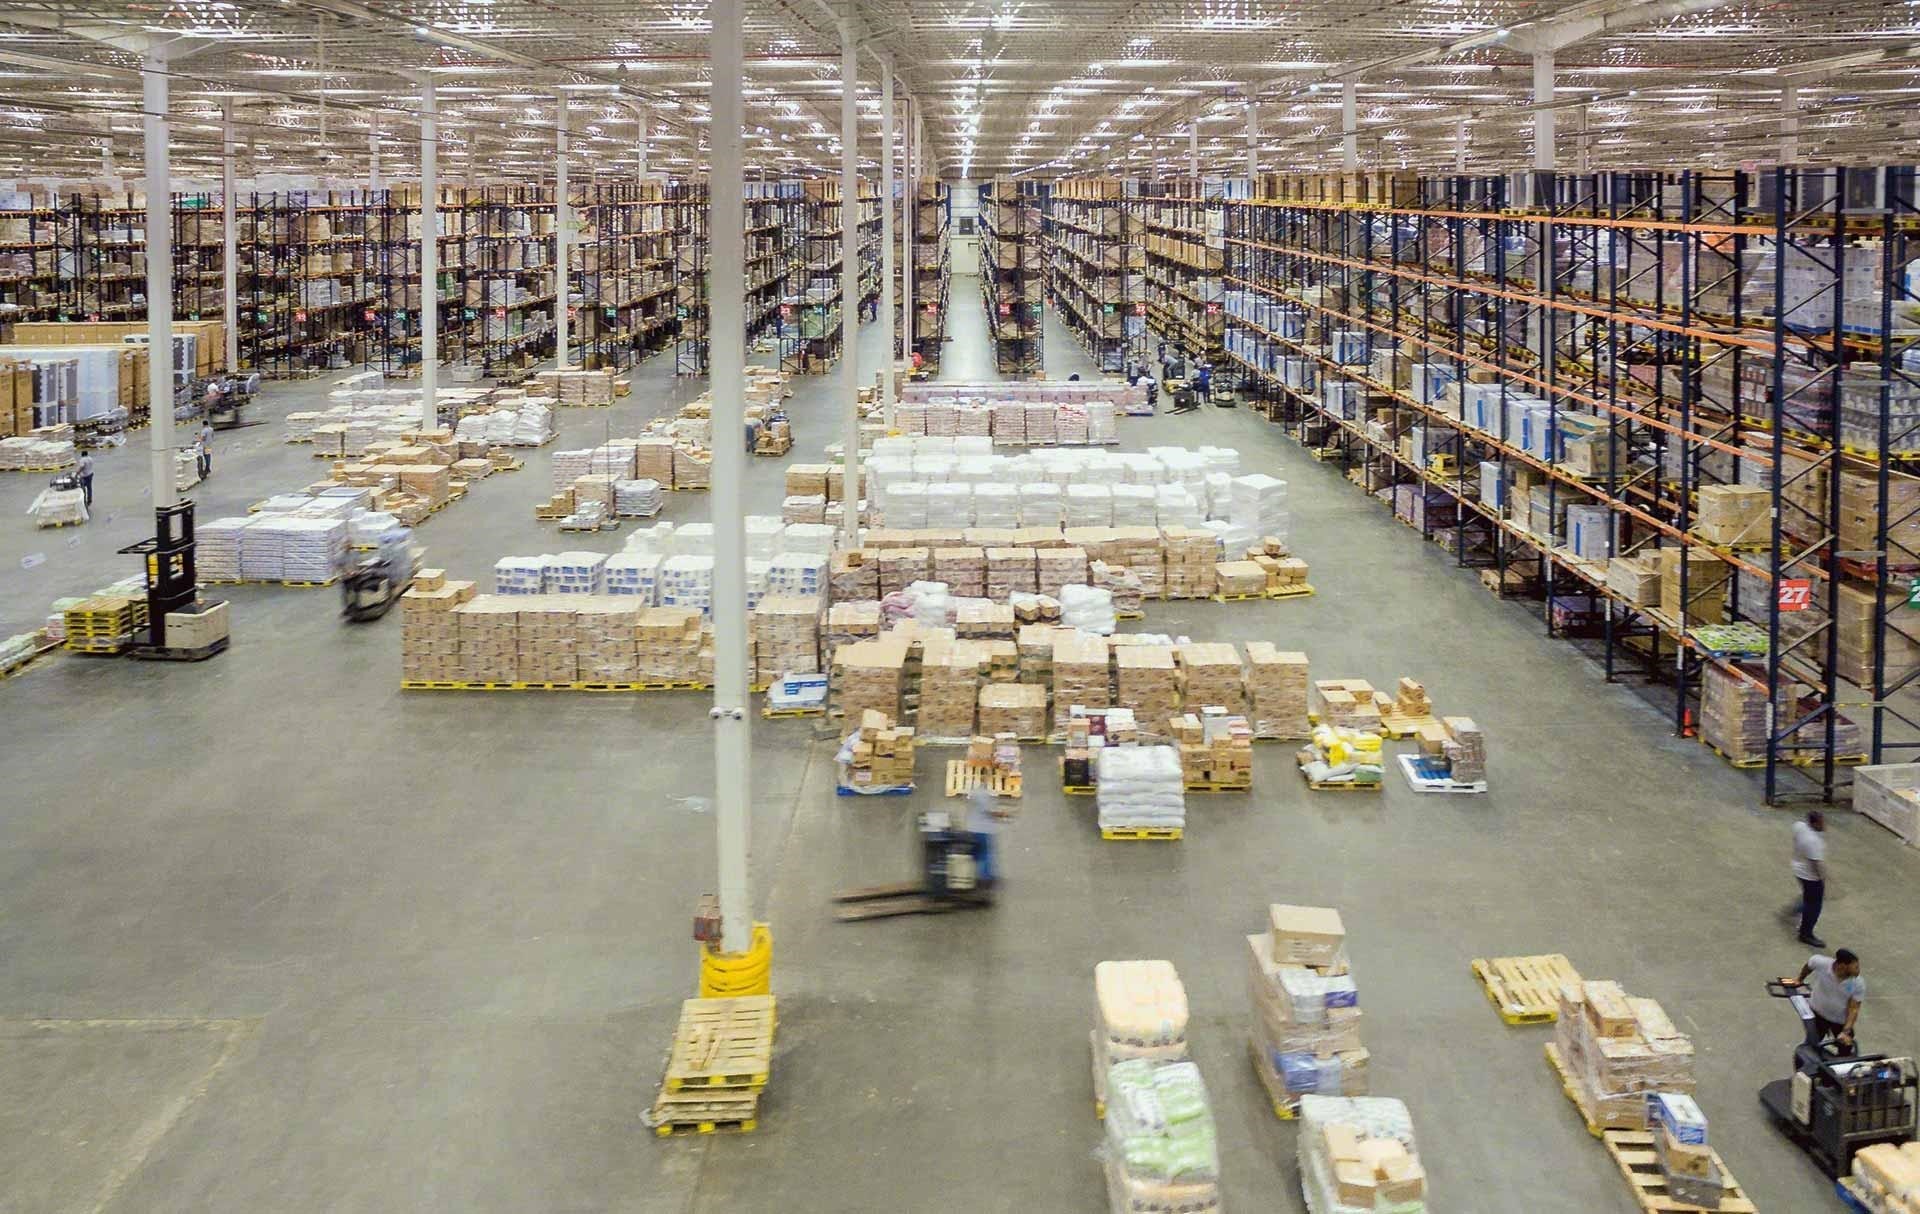 A company performs cross-docking in the warehouse